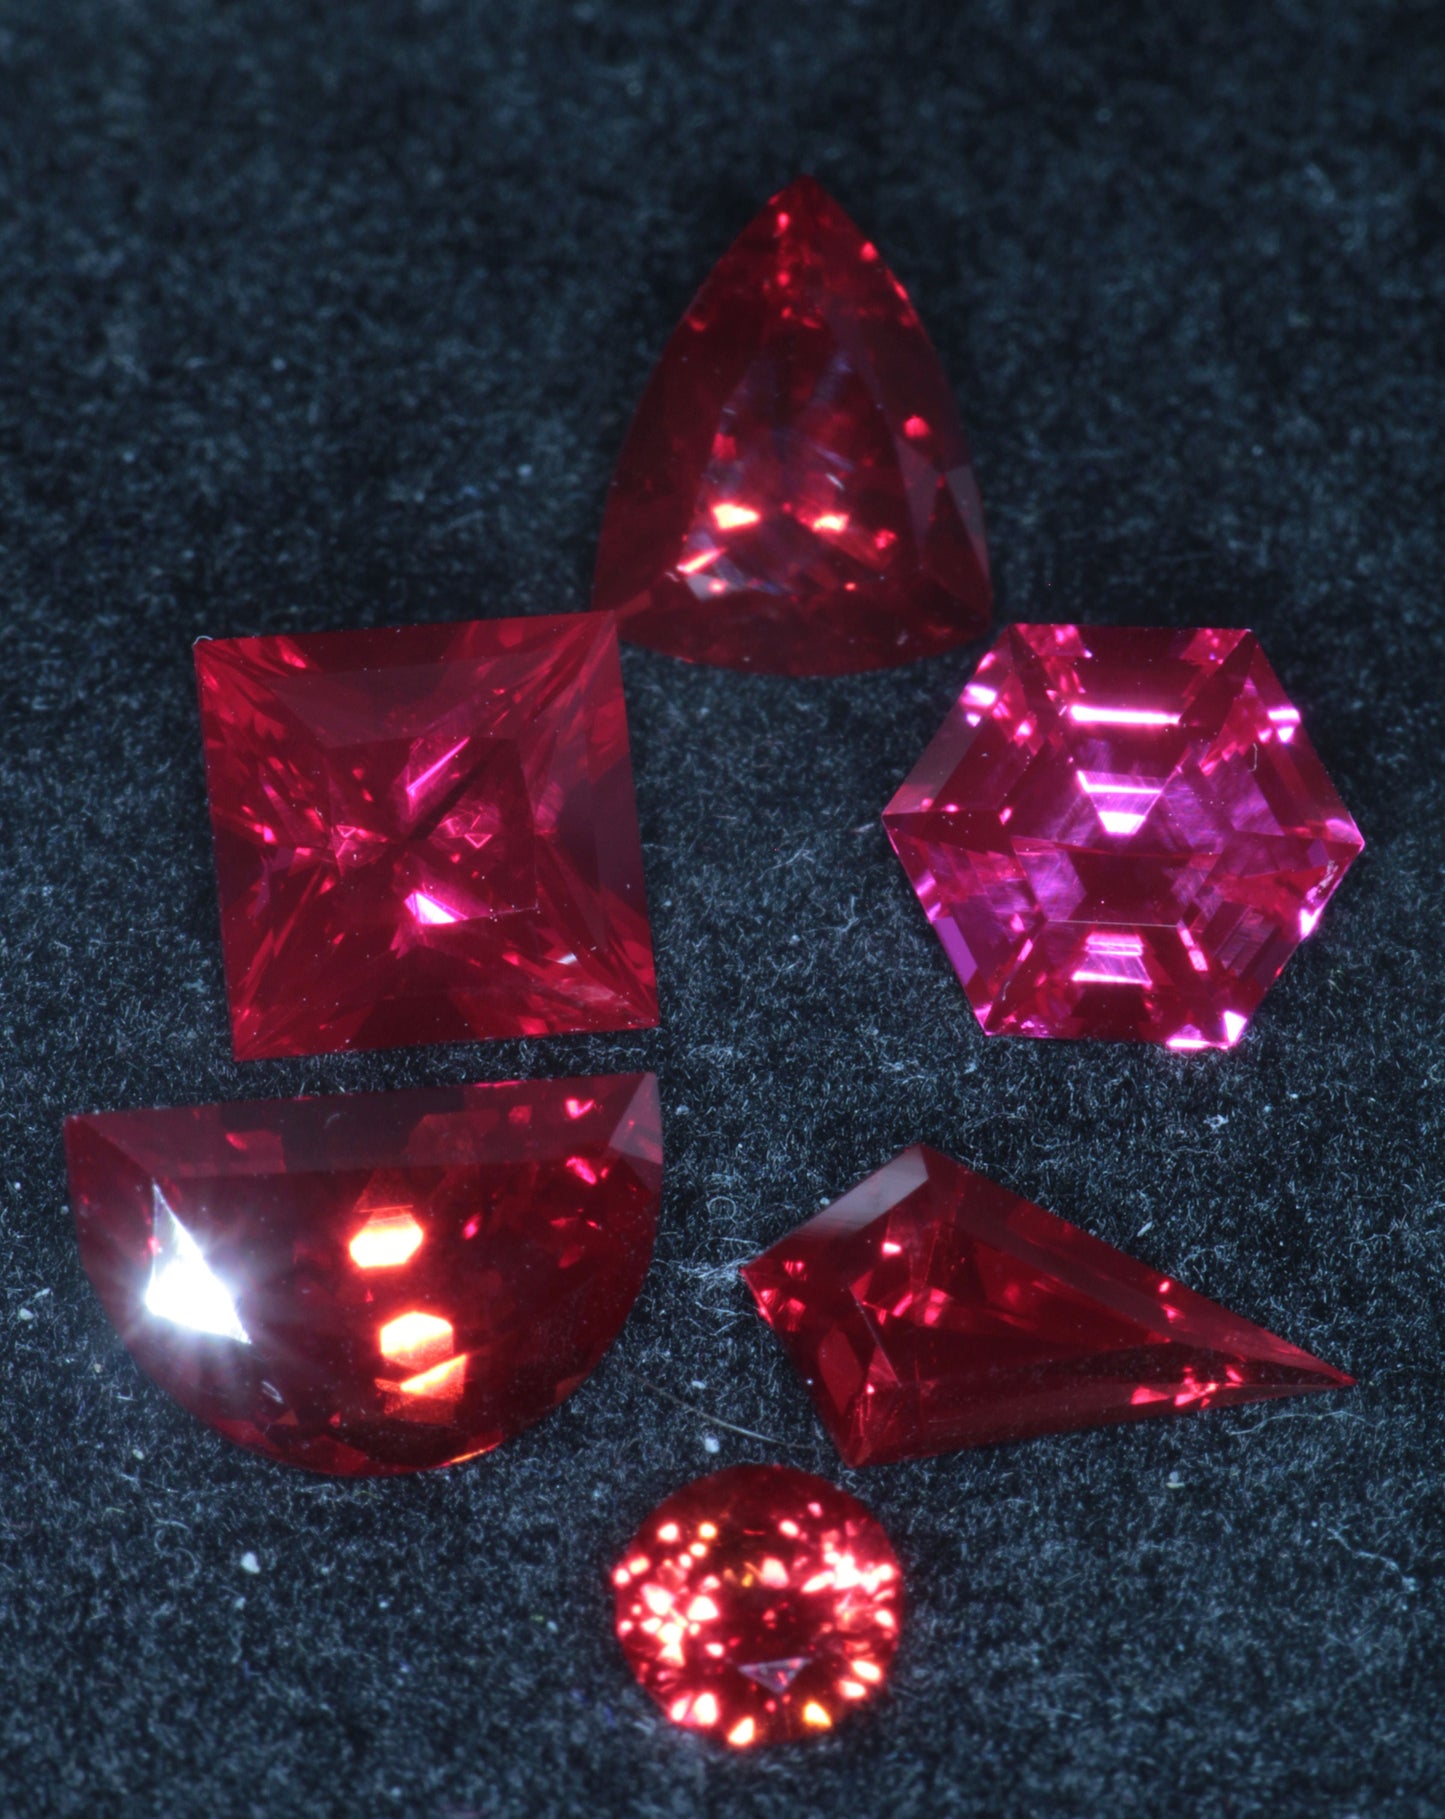 Blood Red Ruby Loose Faceted Stones Czochralski Pulled Crystal